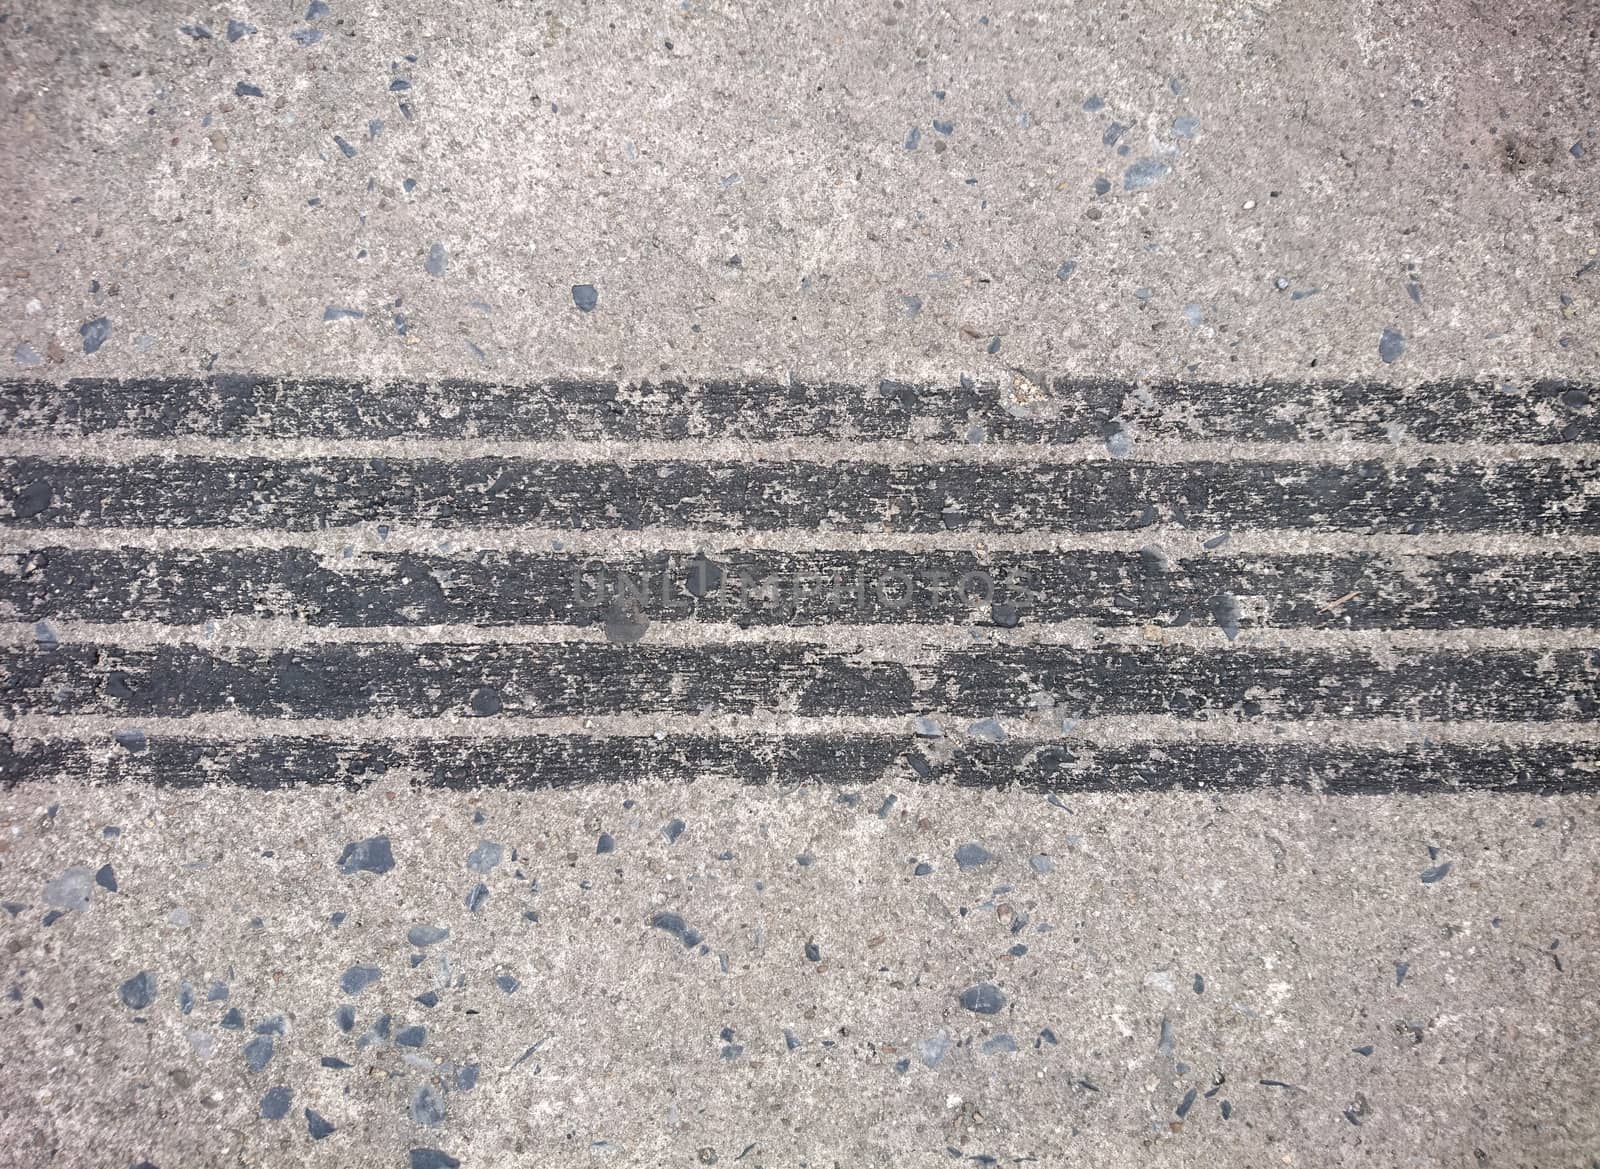 Background of tire marks on road by liewluck